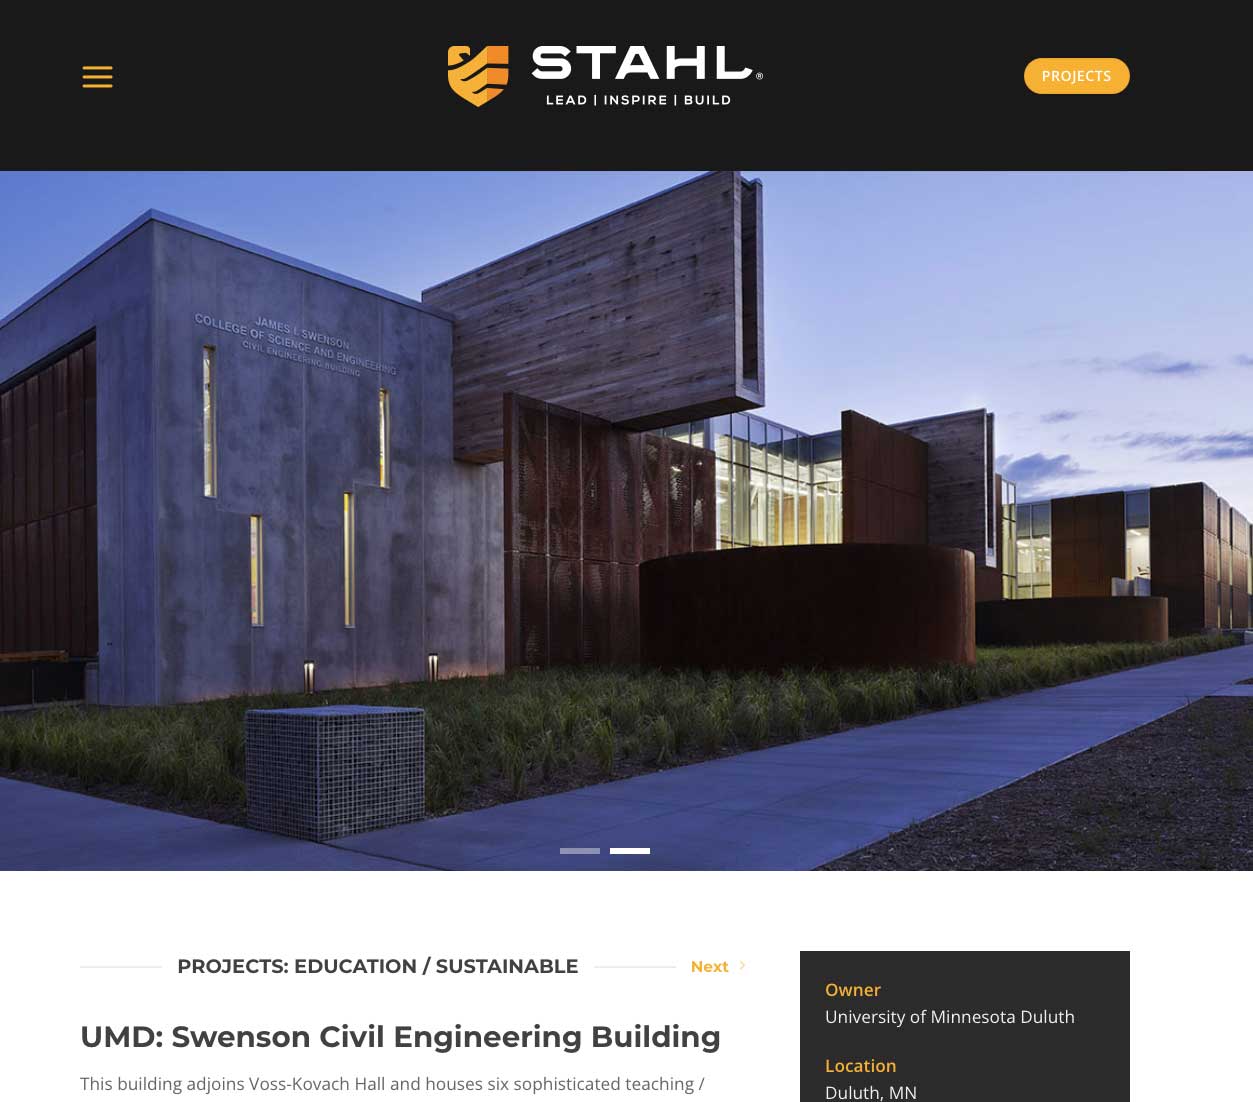 Website Design for Stahl Construction – Project Page